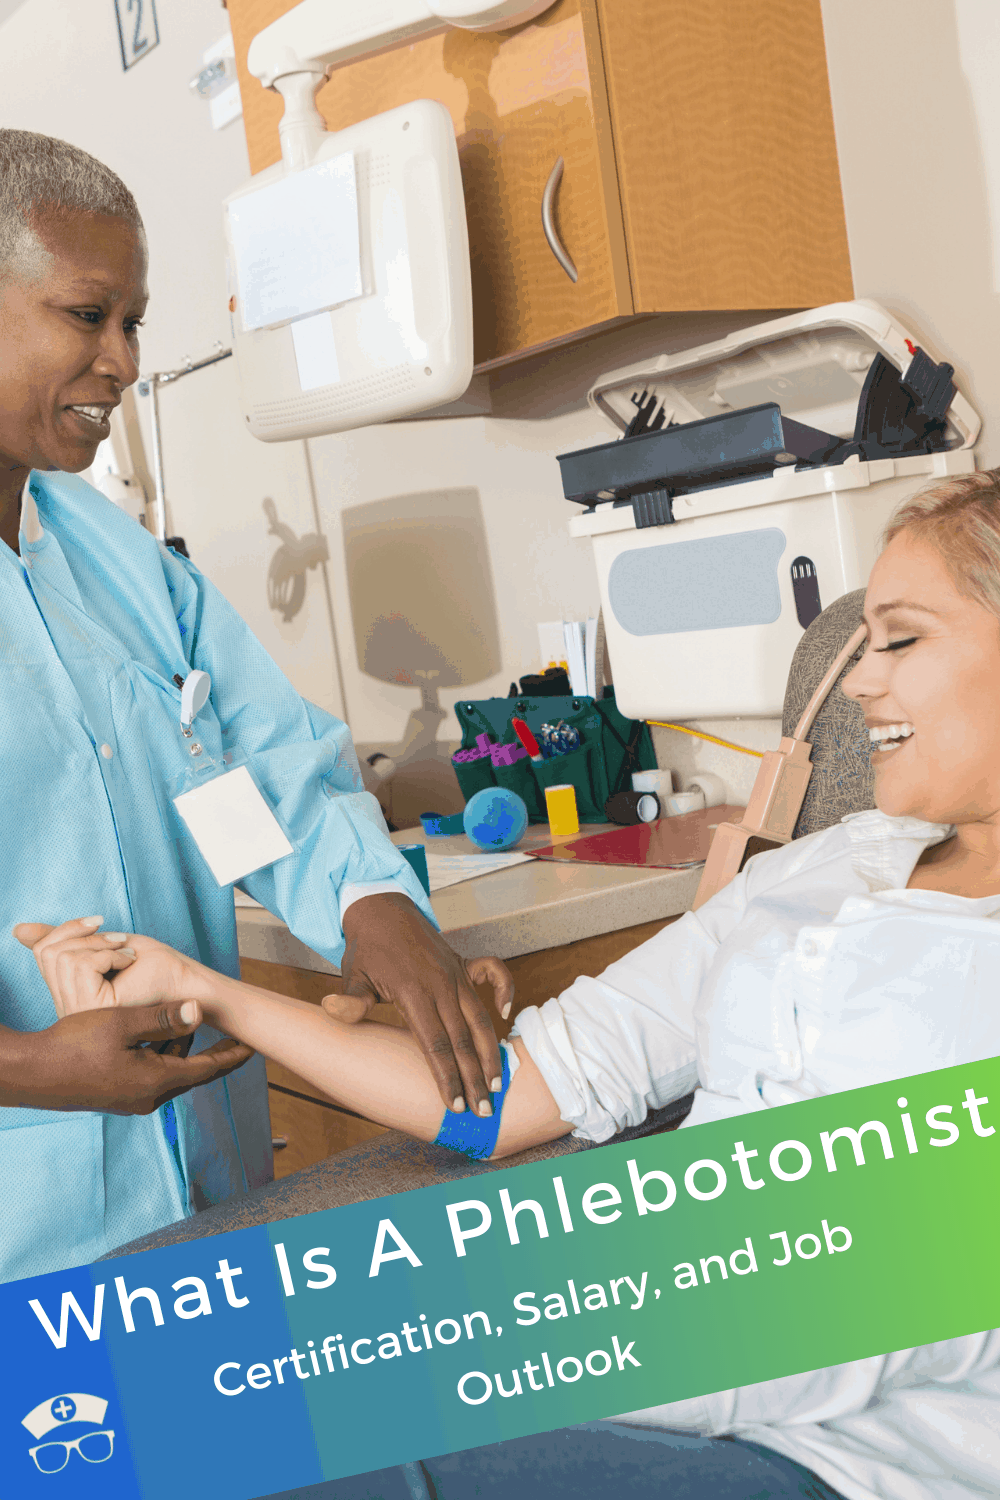 What Is A Phlebotomist: Certification, Salary, and Job Outlook